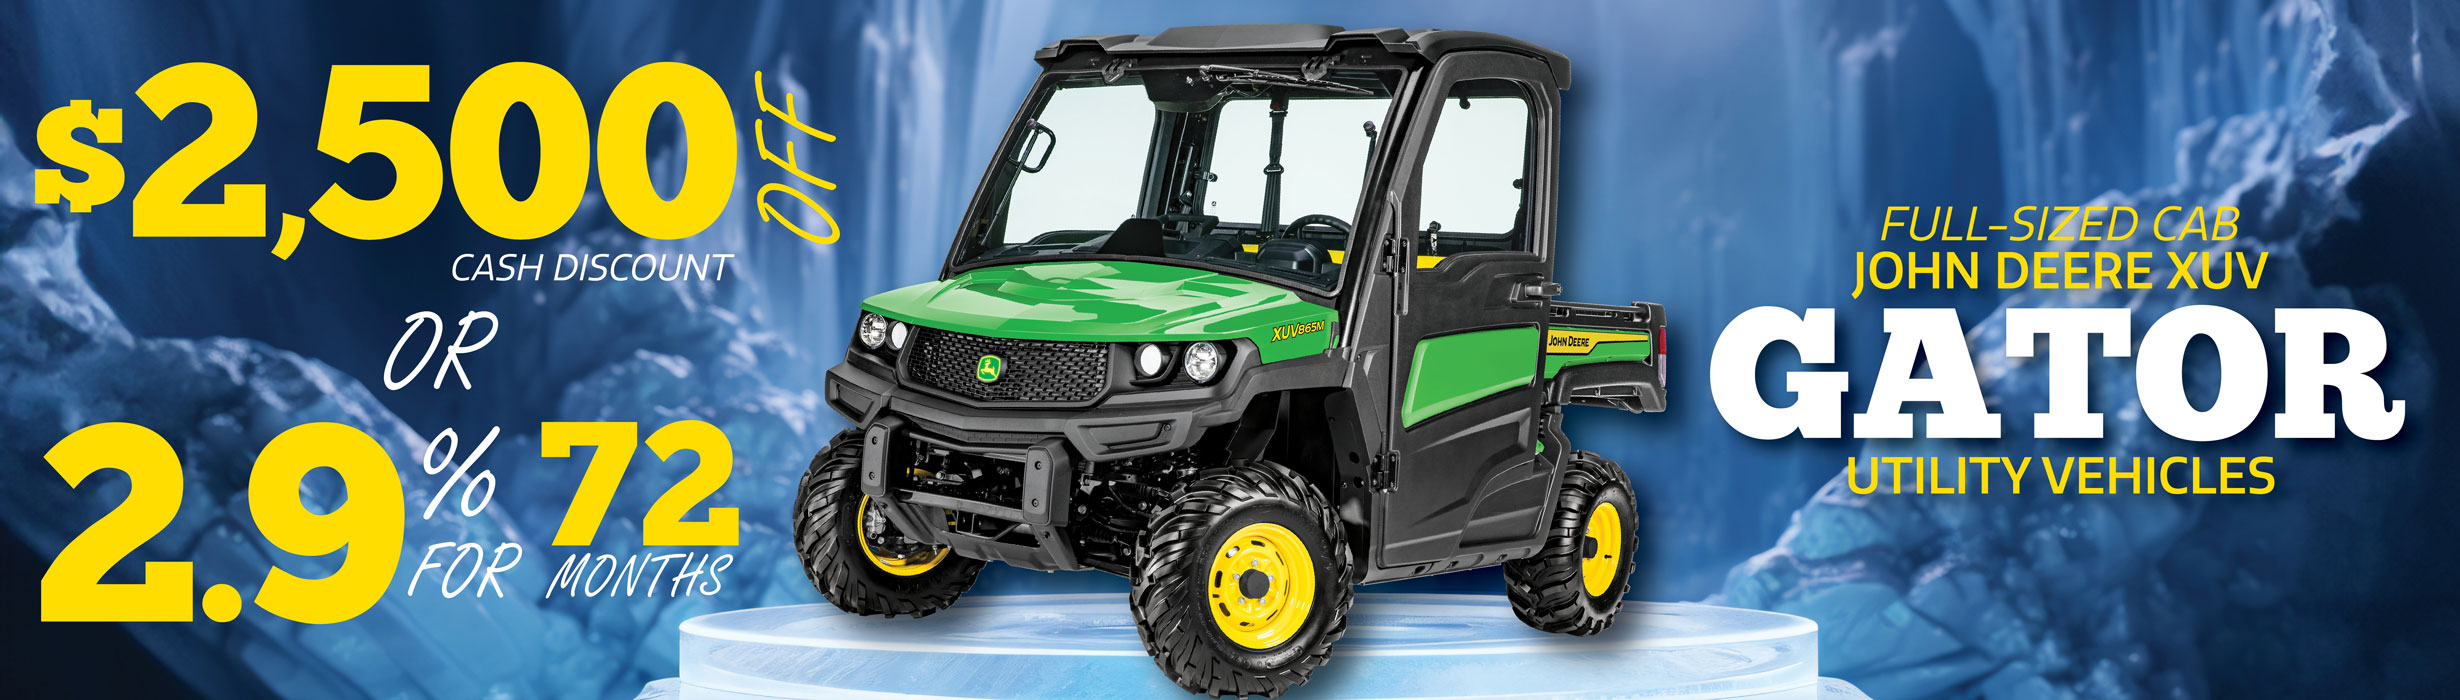 $2,500 OFF OR 2.9% for 72 mos on Select Cab Gators